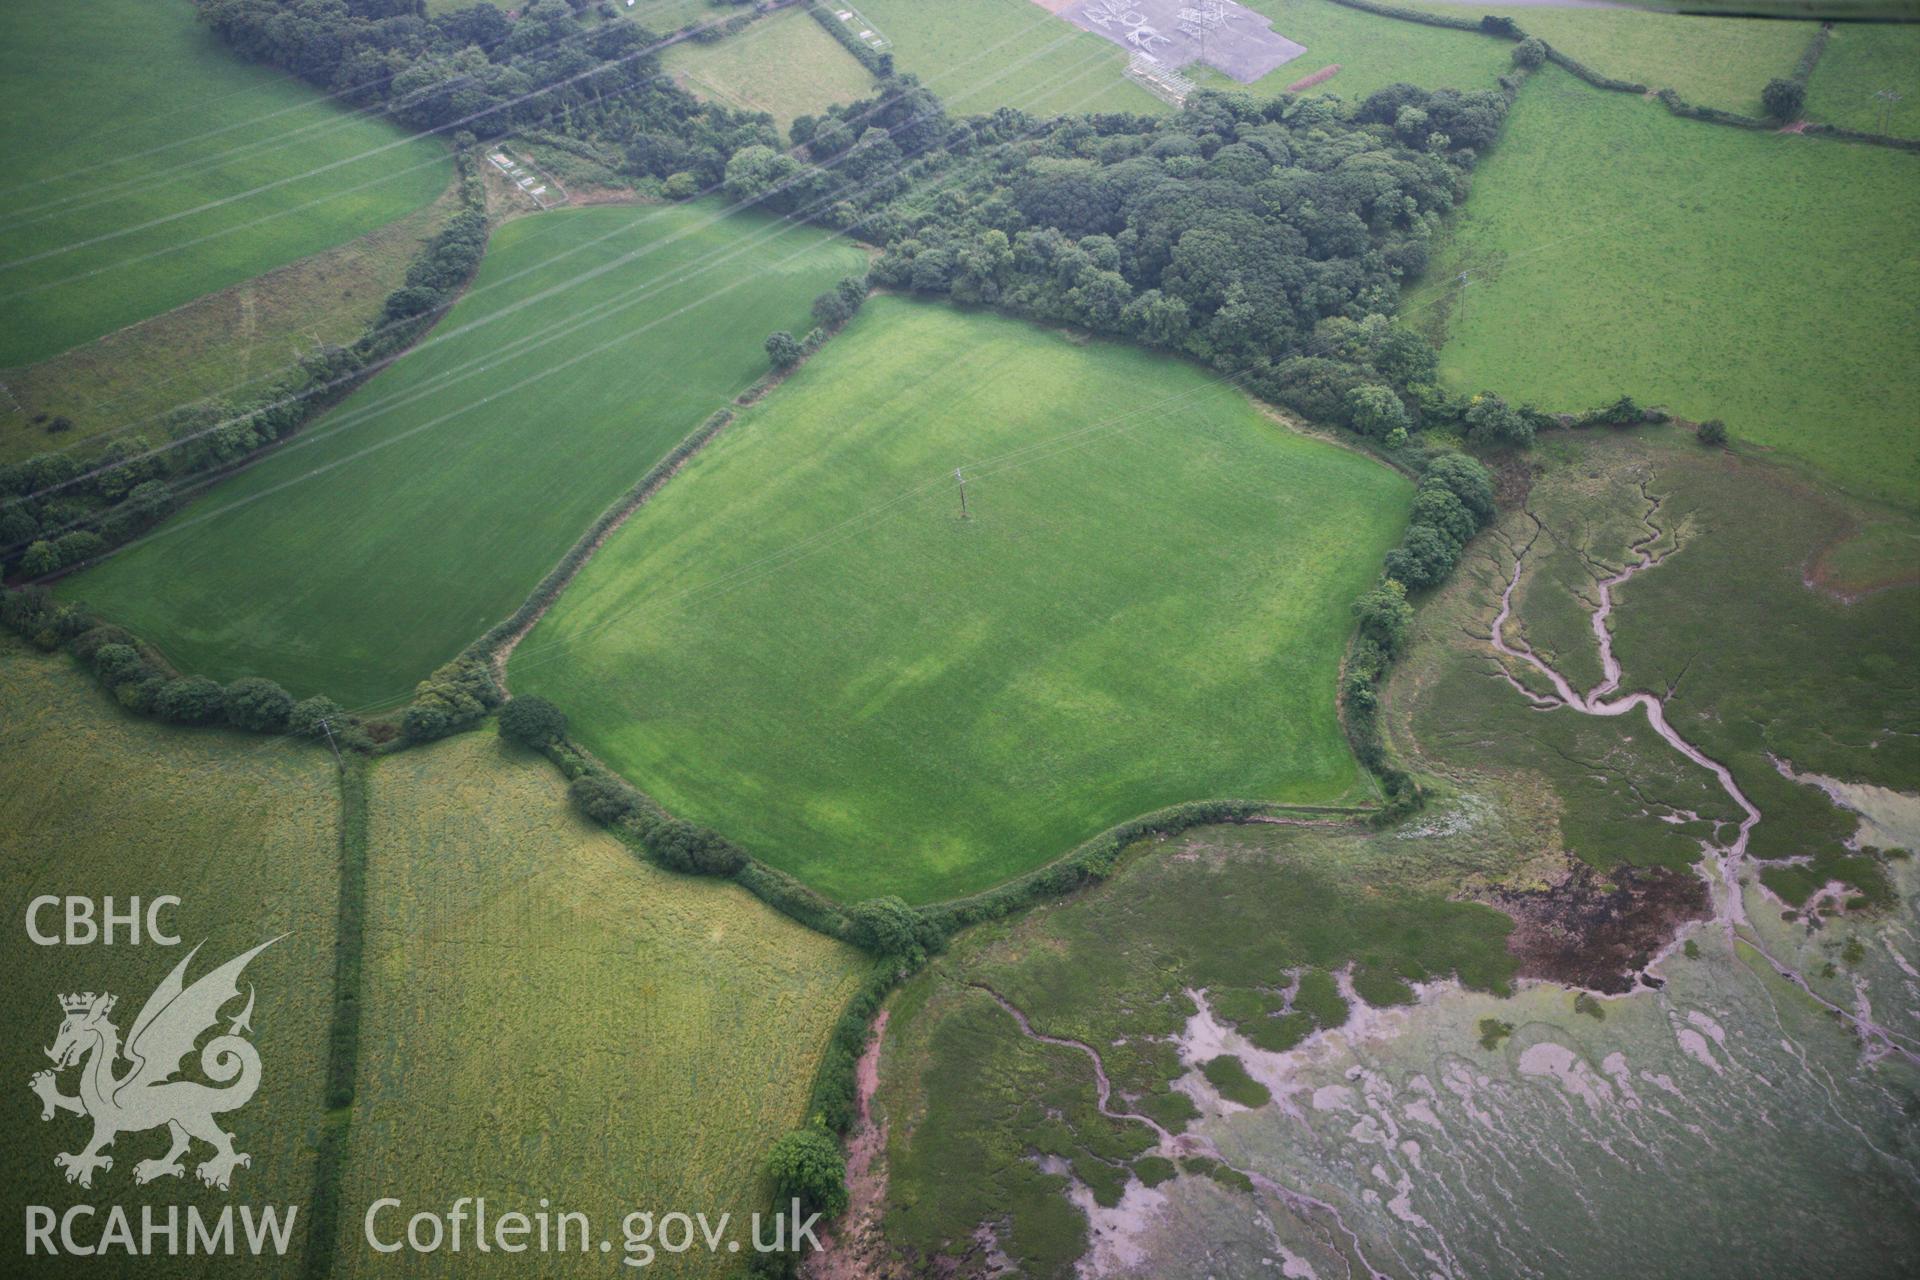 RCAHMW colour oblique photograph of Brownslate, cropmarks of possible enclosure. Taken by Toby Driver on 23/07/2010.